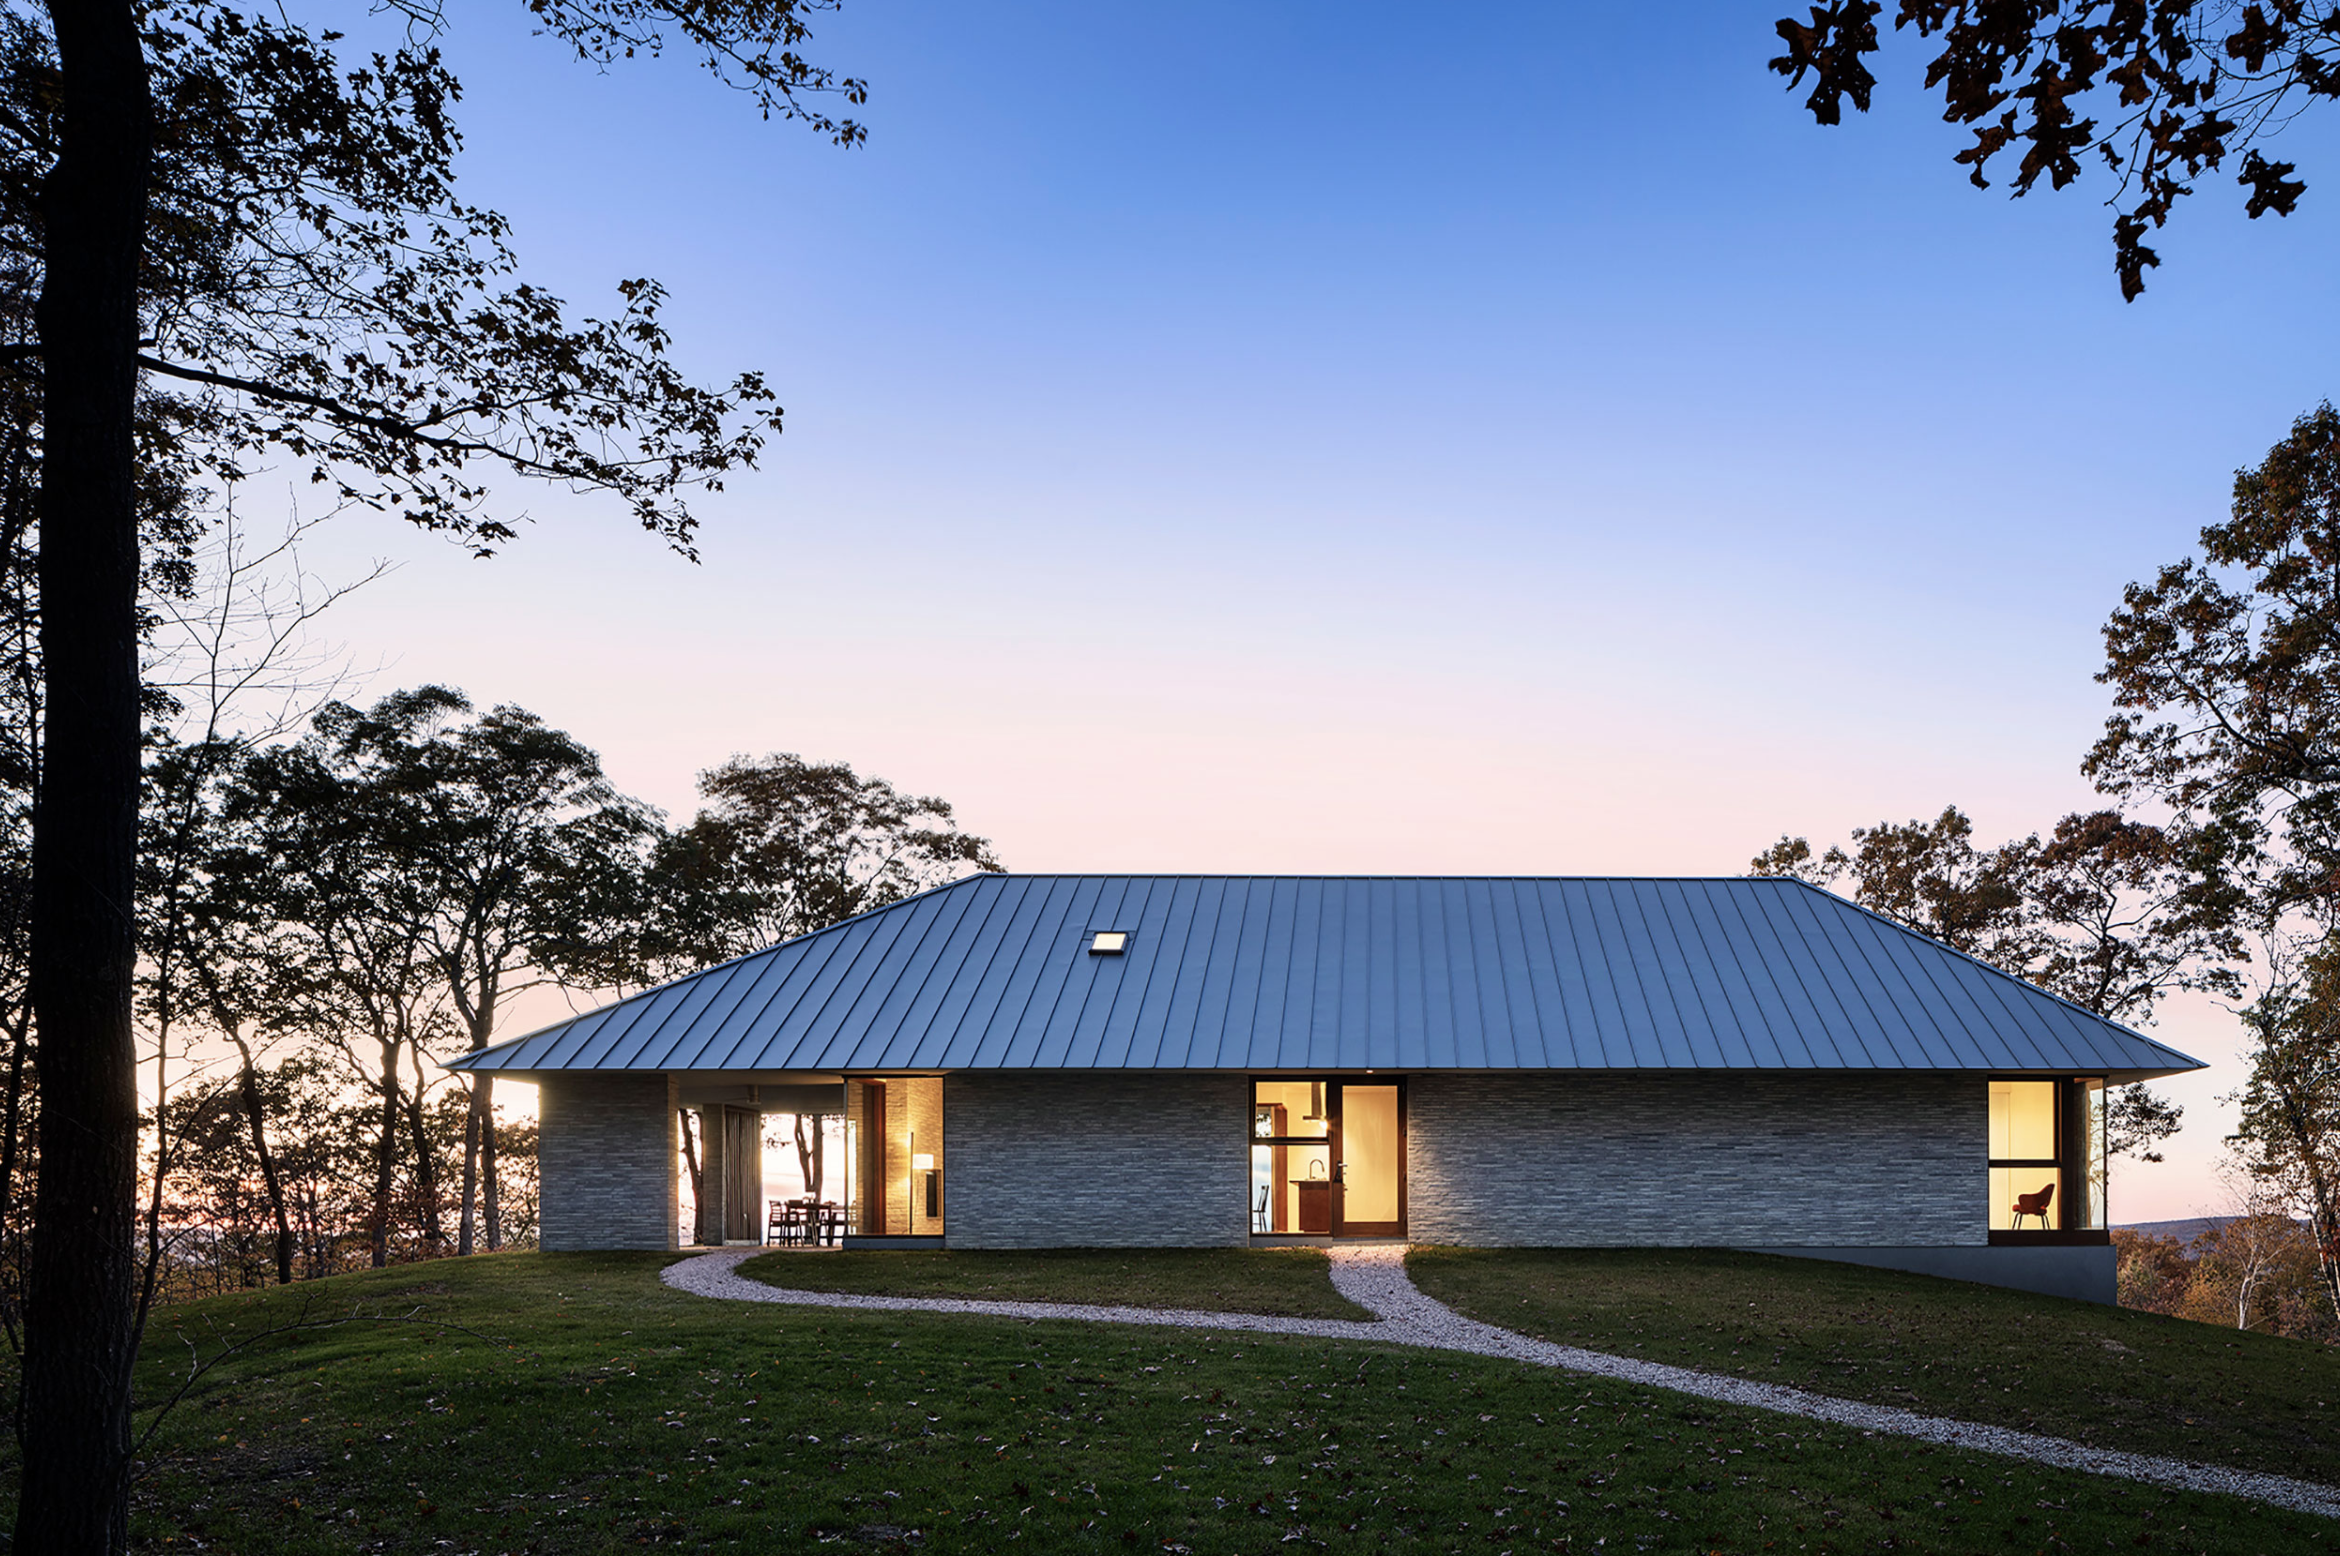 Mount Mauwen House by Paul Schulhof, AIA, in South Kent, CT. Photo: Michael Moran.